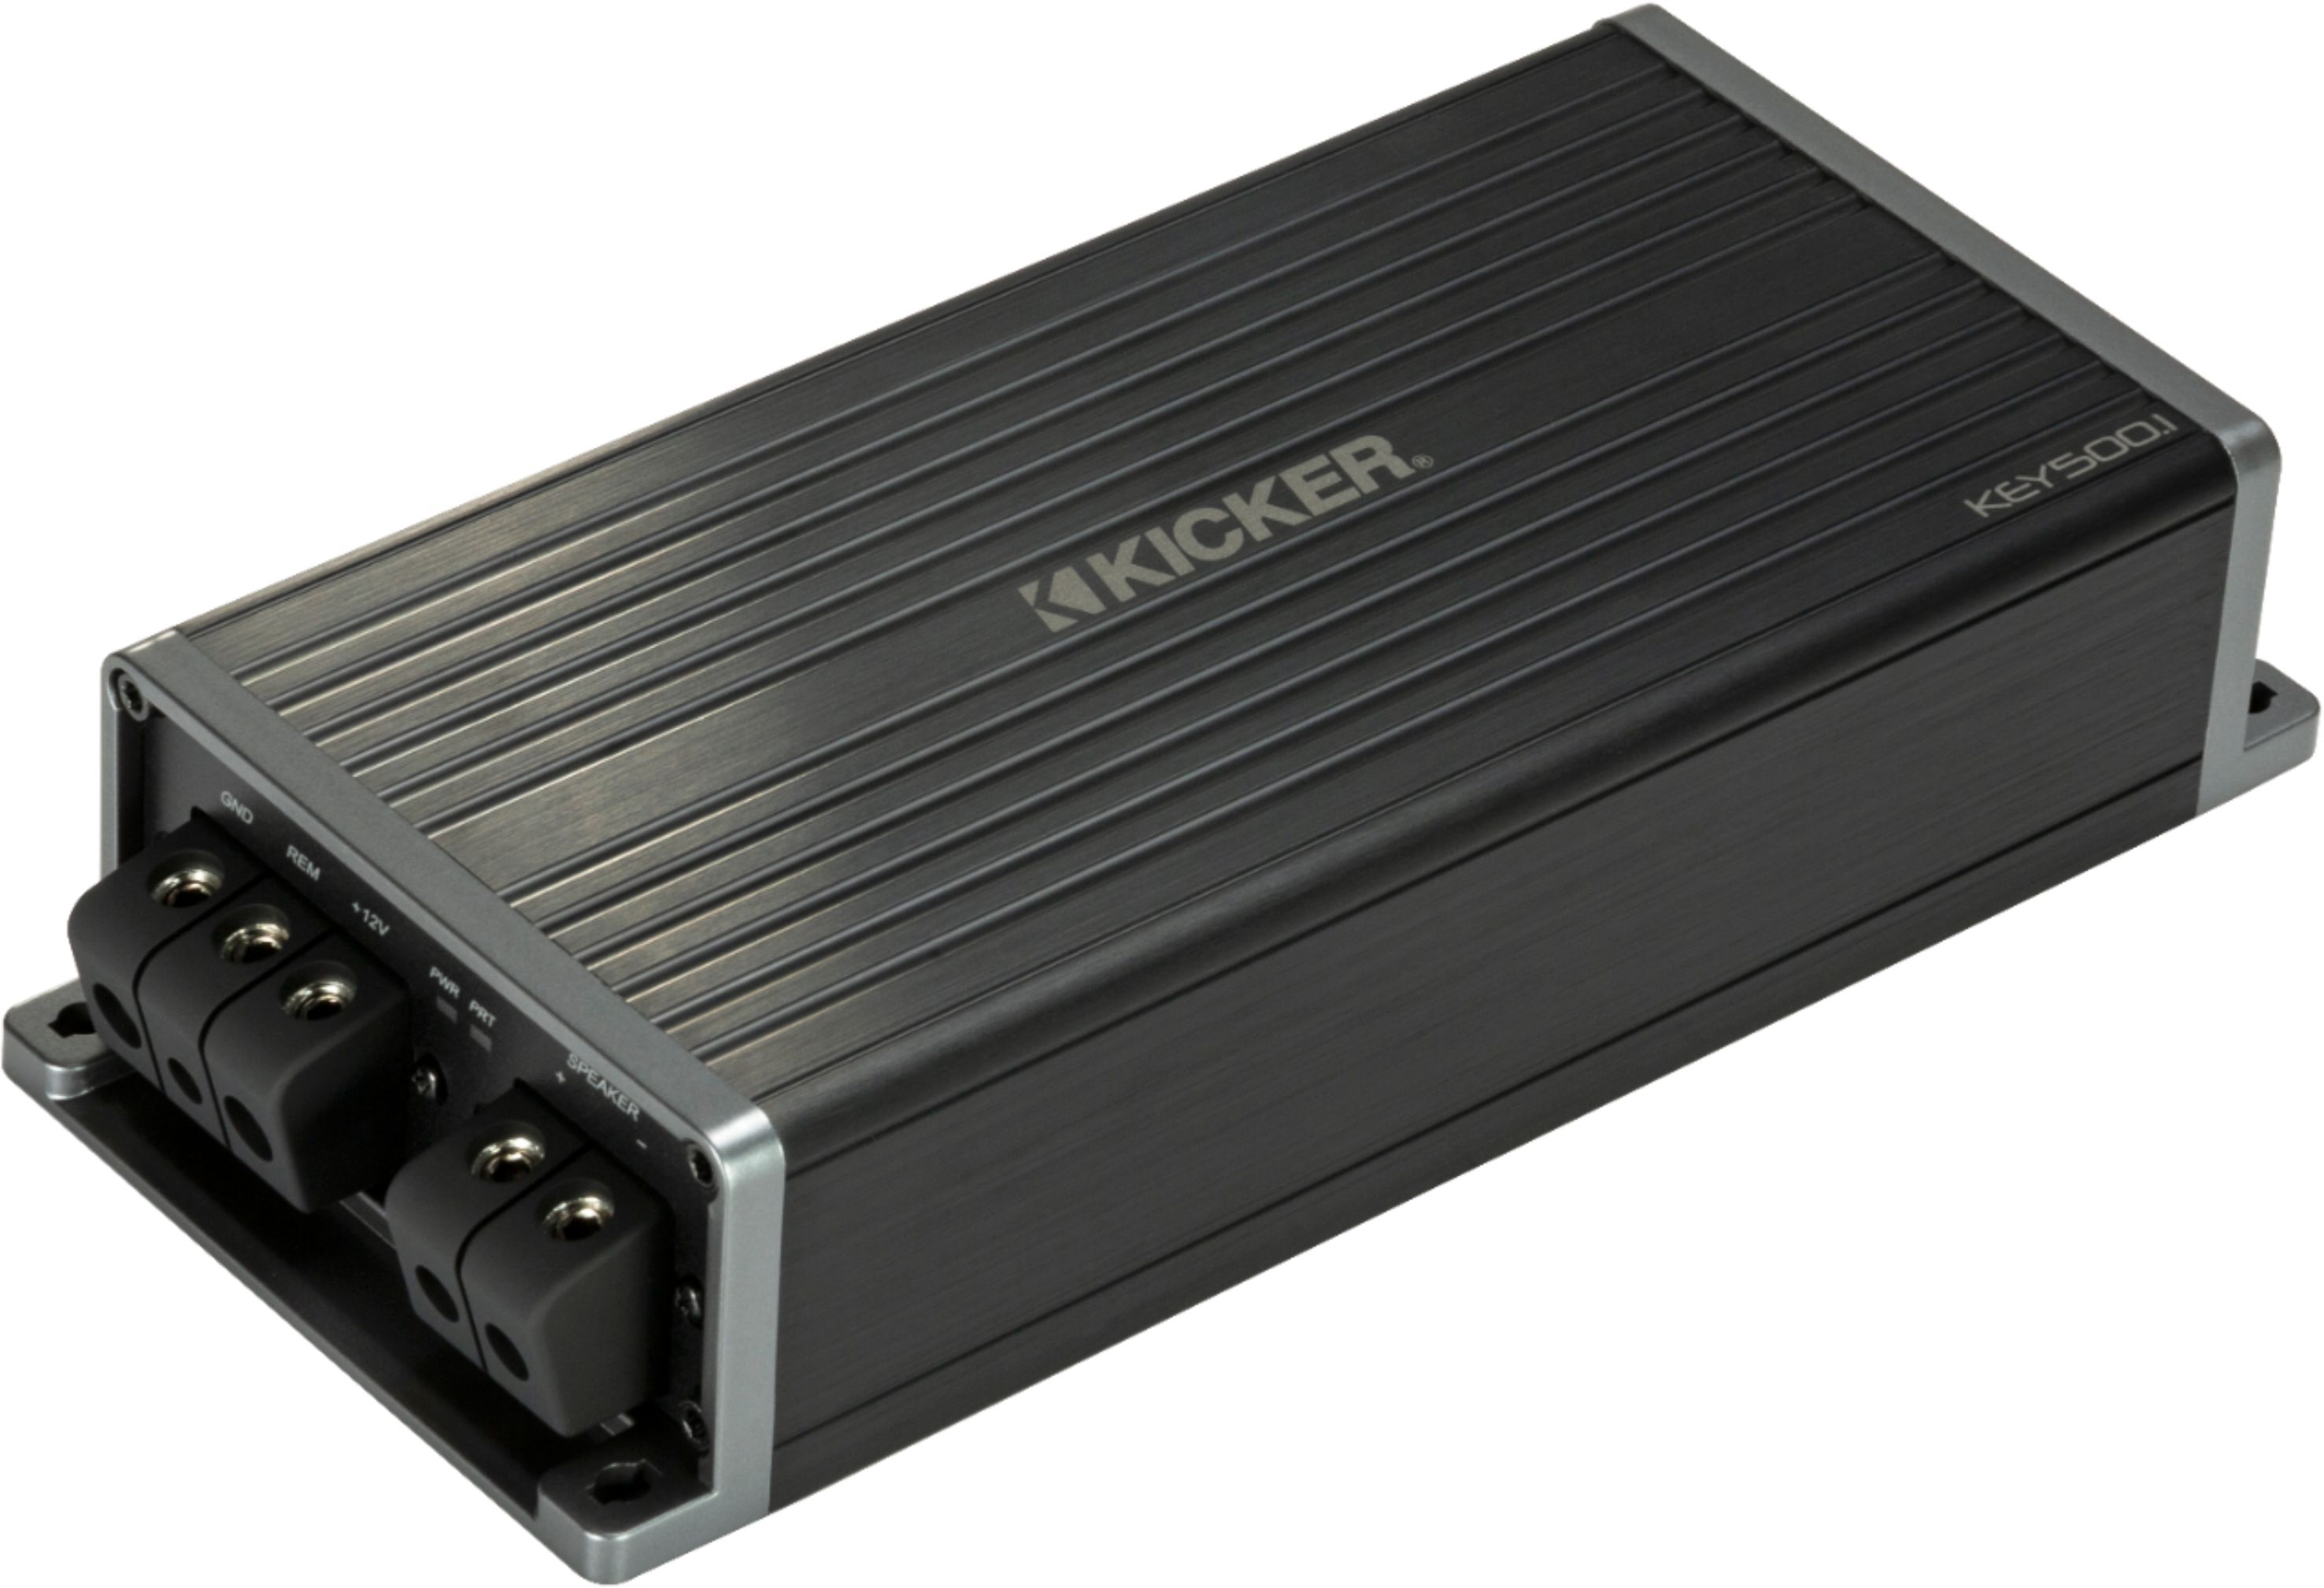 Angle View: KICKER - KEY 500W Mono Amplifier with Variable Crossovers - Black